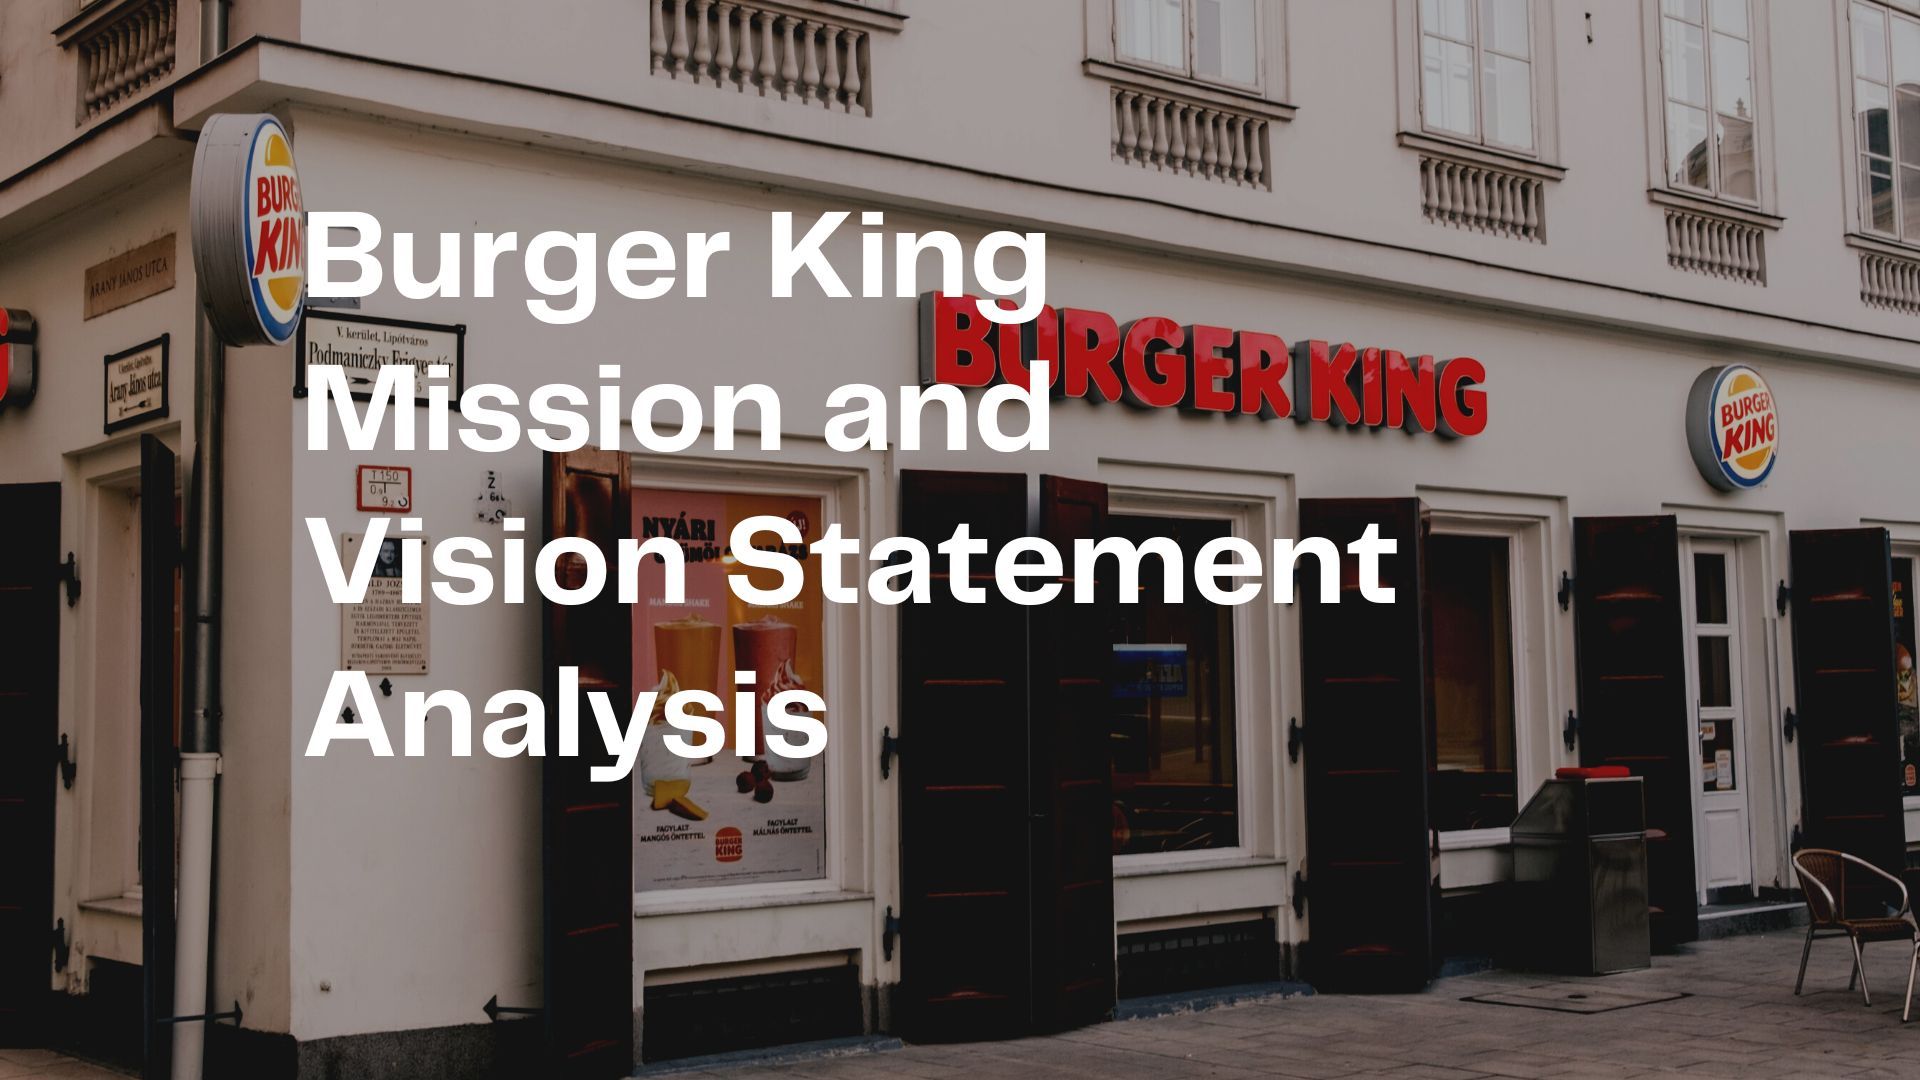 Burger King Mission and Vision Statement Analysis (2).jpg